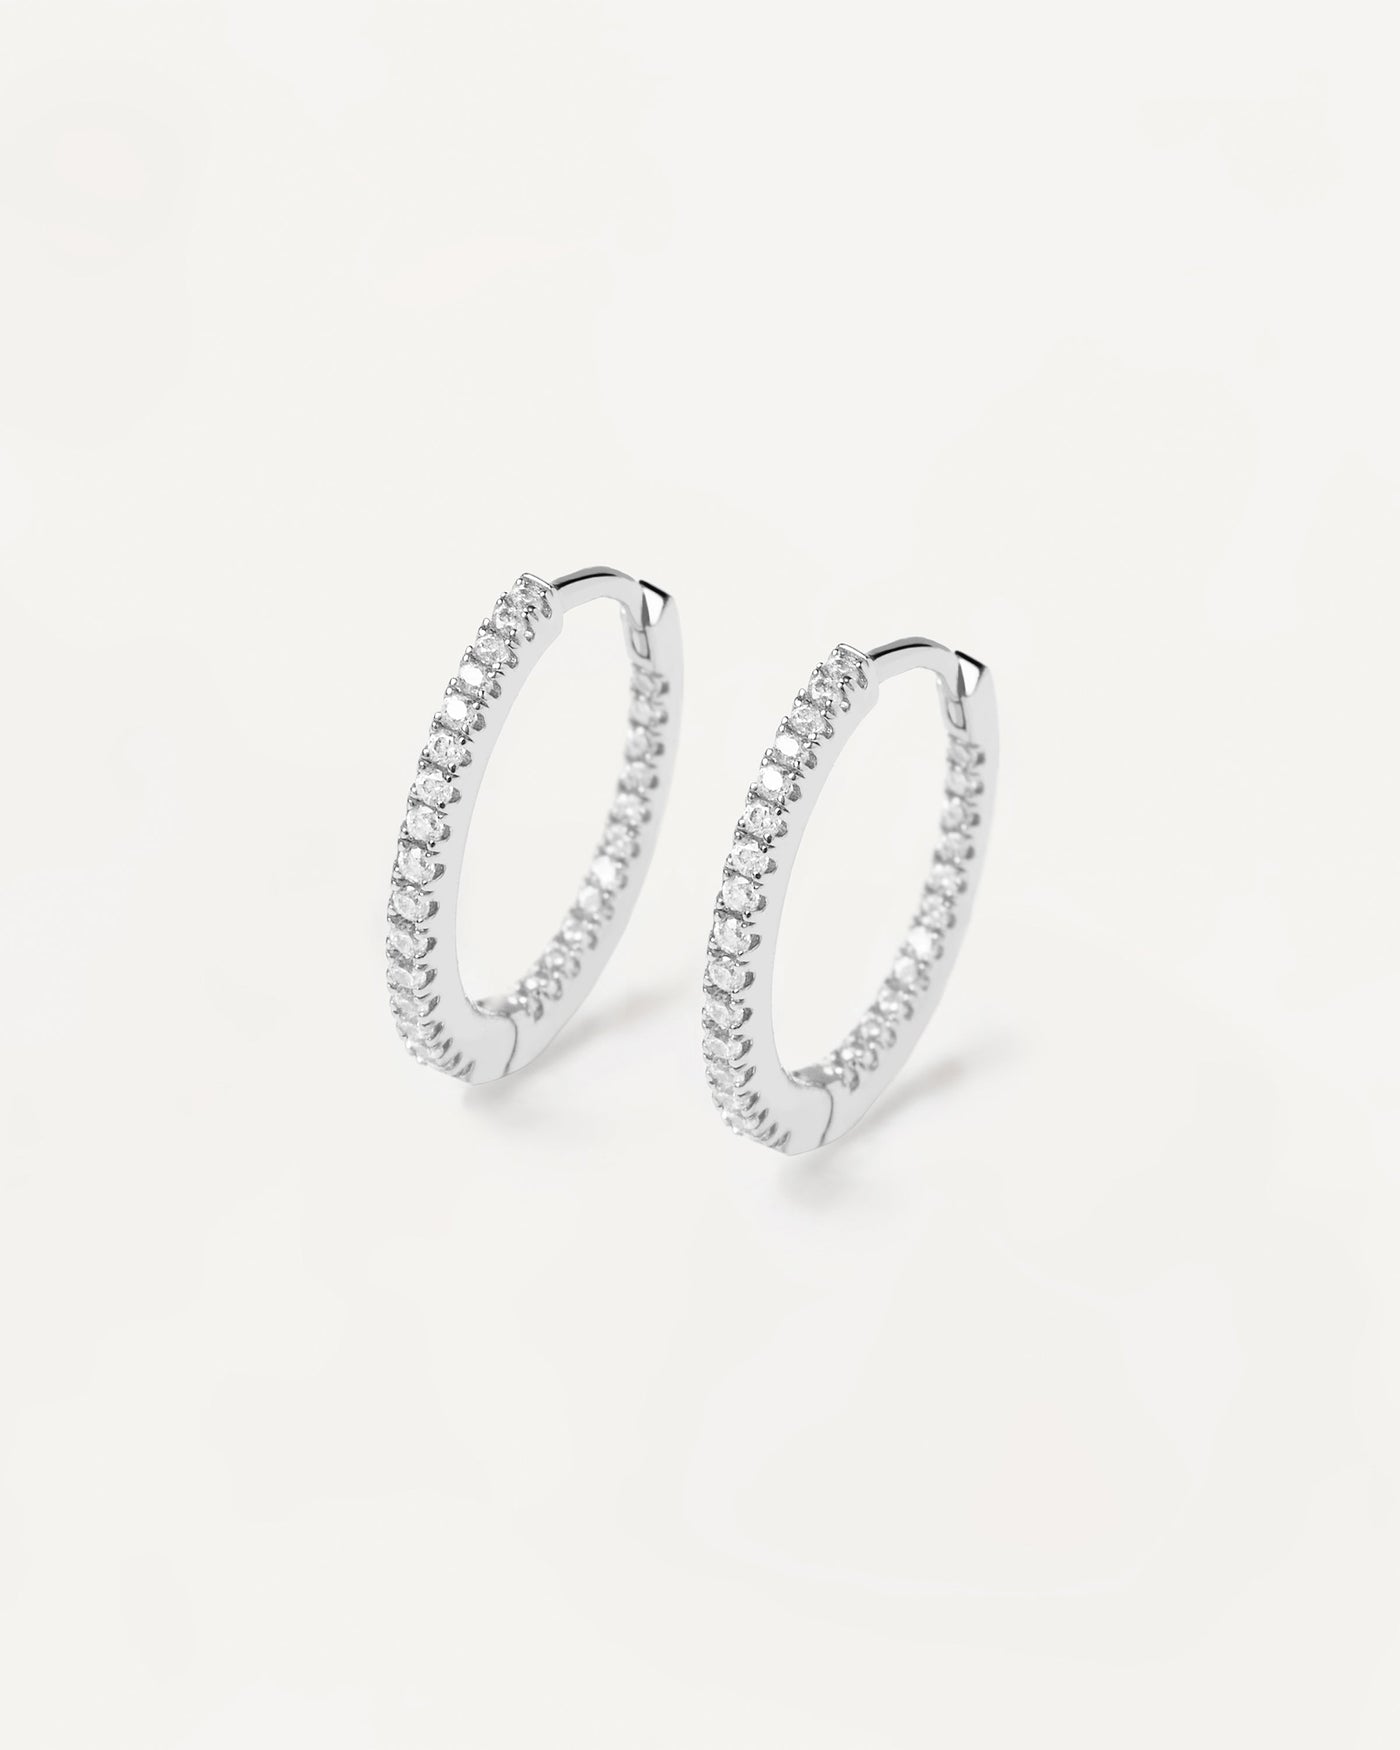 2023 Selection | White Medium Hoops Silver. Full hoop latch-back earrings in sterling silver set with white zirconia. Get the latest arrival from PDPAOLA. Place your order safely and get this Best Seller. Free Shipping.